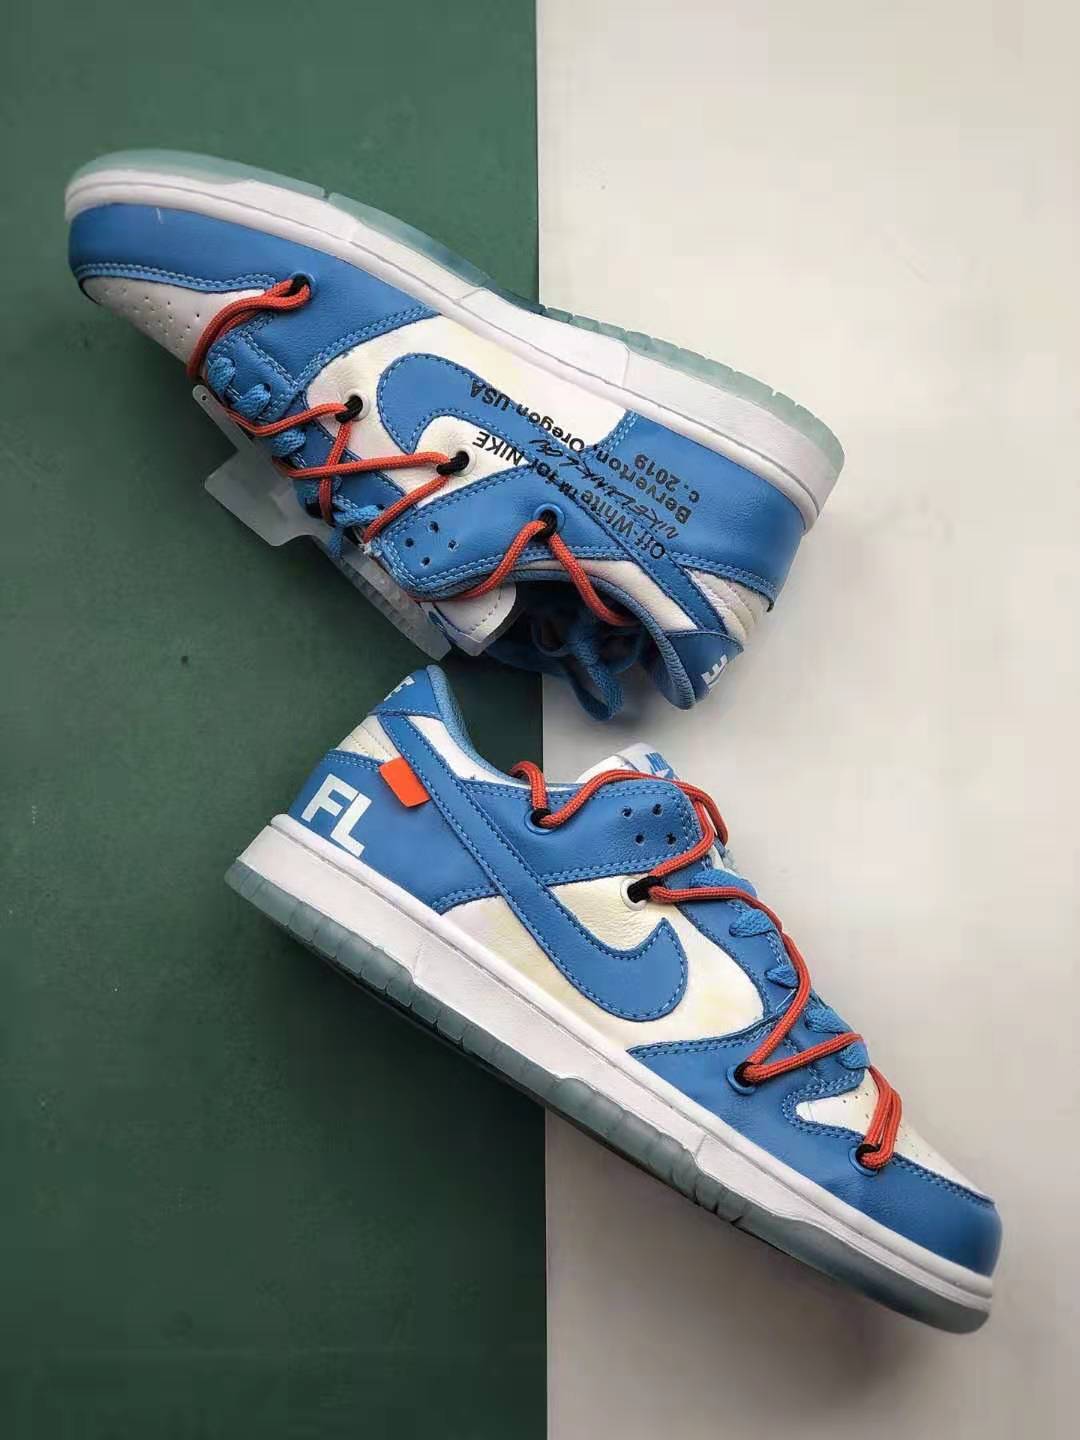 OFF-WHITE x Futura x Nike Dunk SB BQ6817-099: Exclusive Collaborative Sneakers at Affordable Prices!